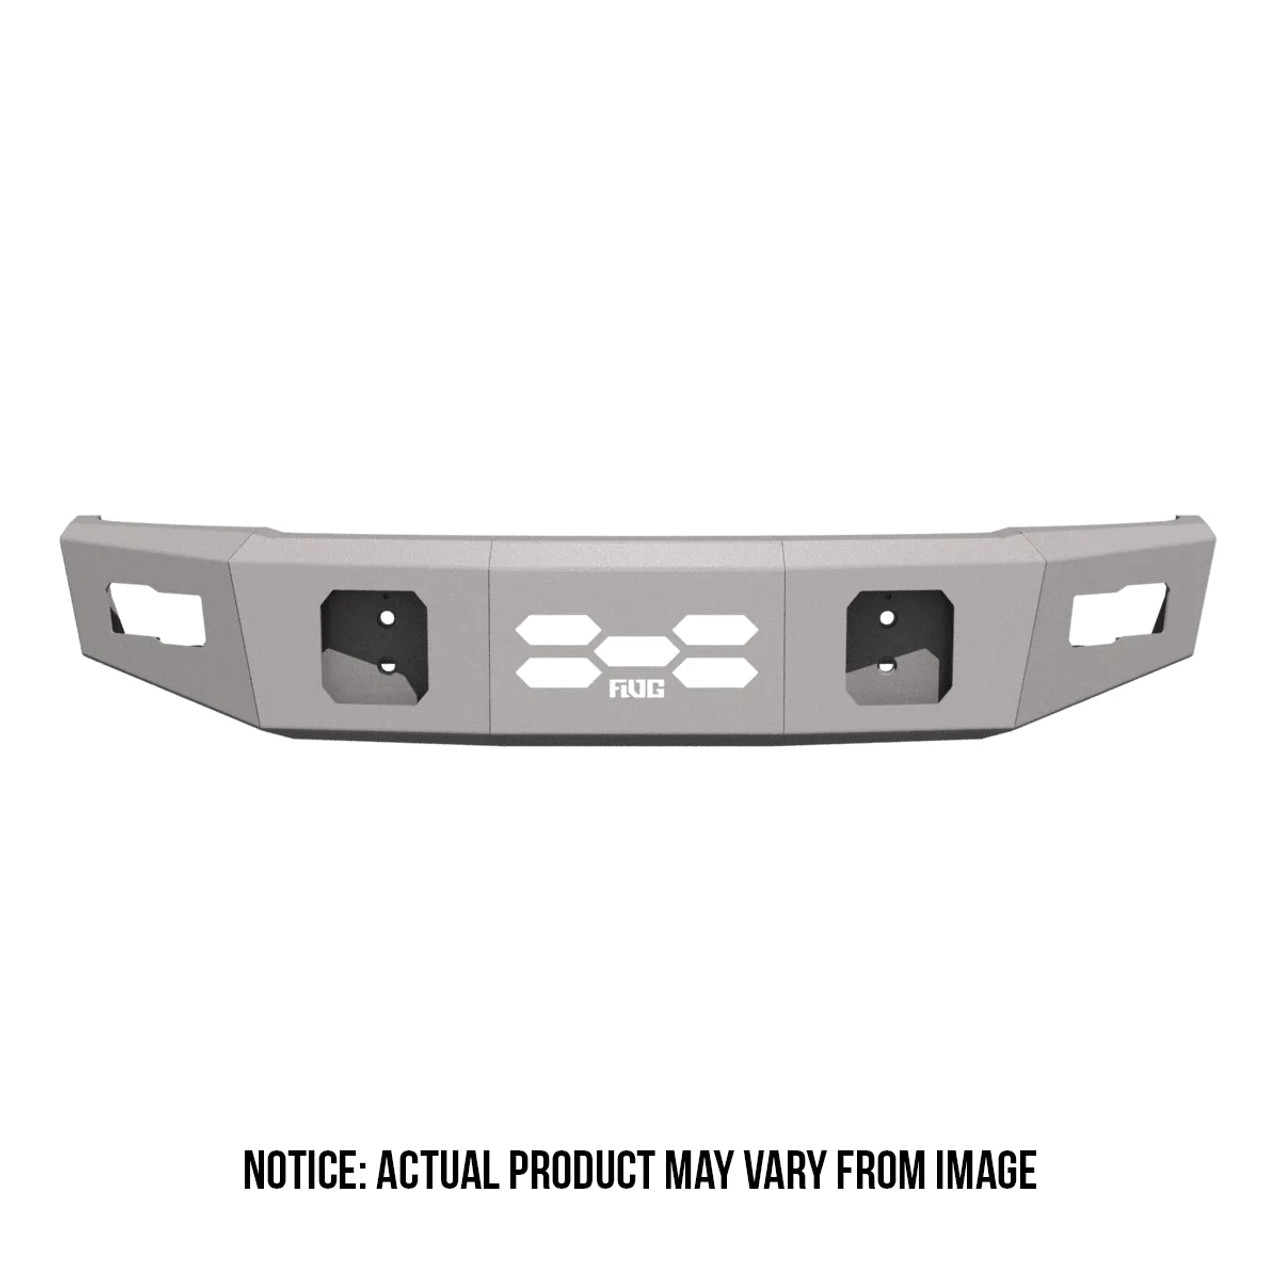 Flog WD Series Front Bumper - 2008-2010 Ford (F250/350) 6.4L Powerstroke - Main View